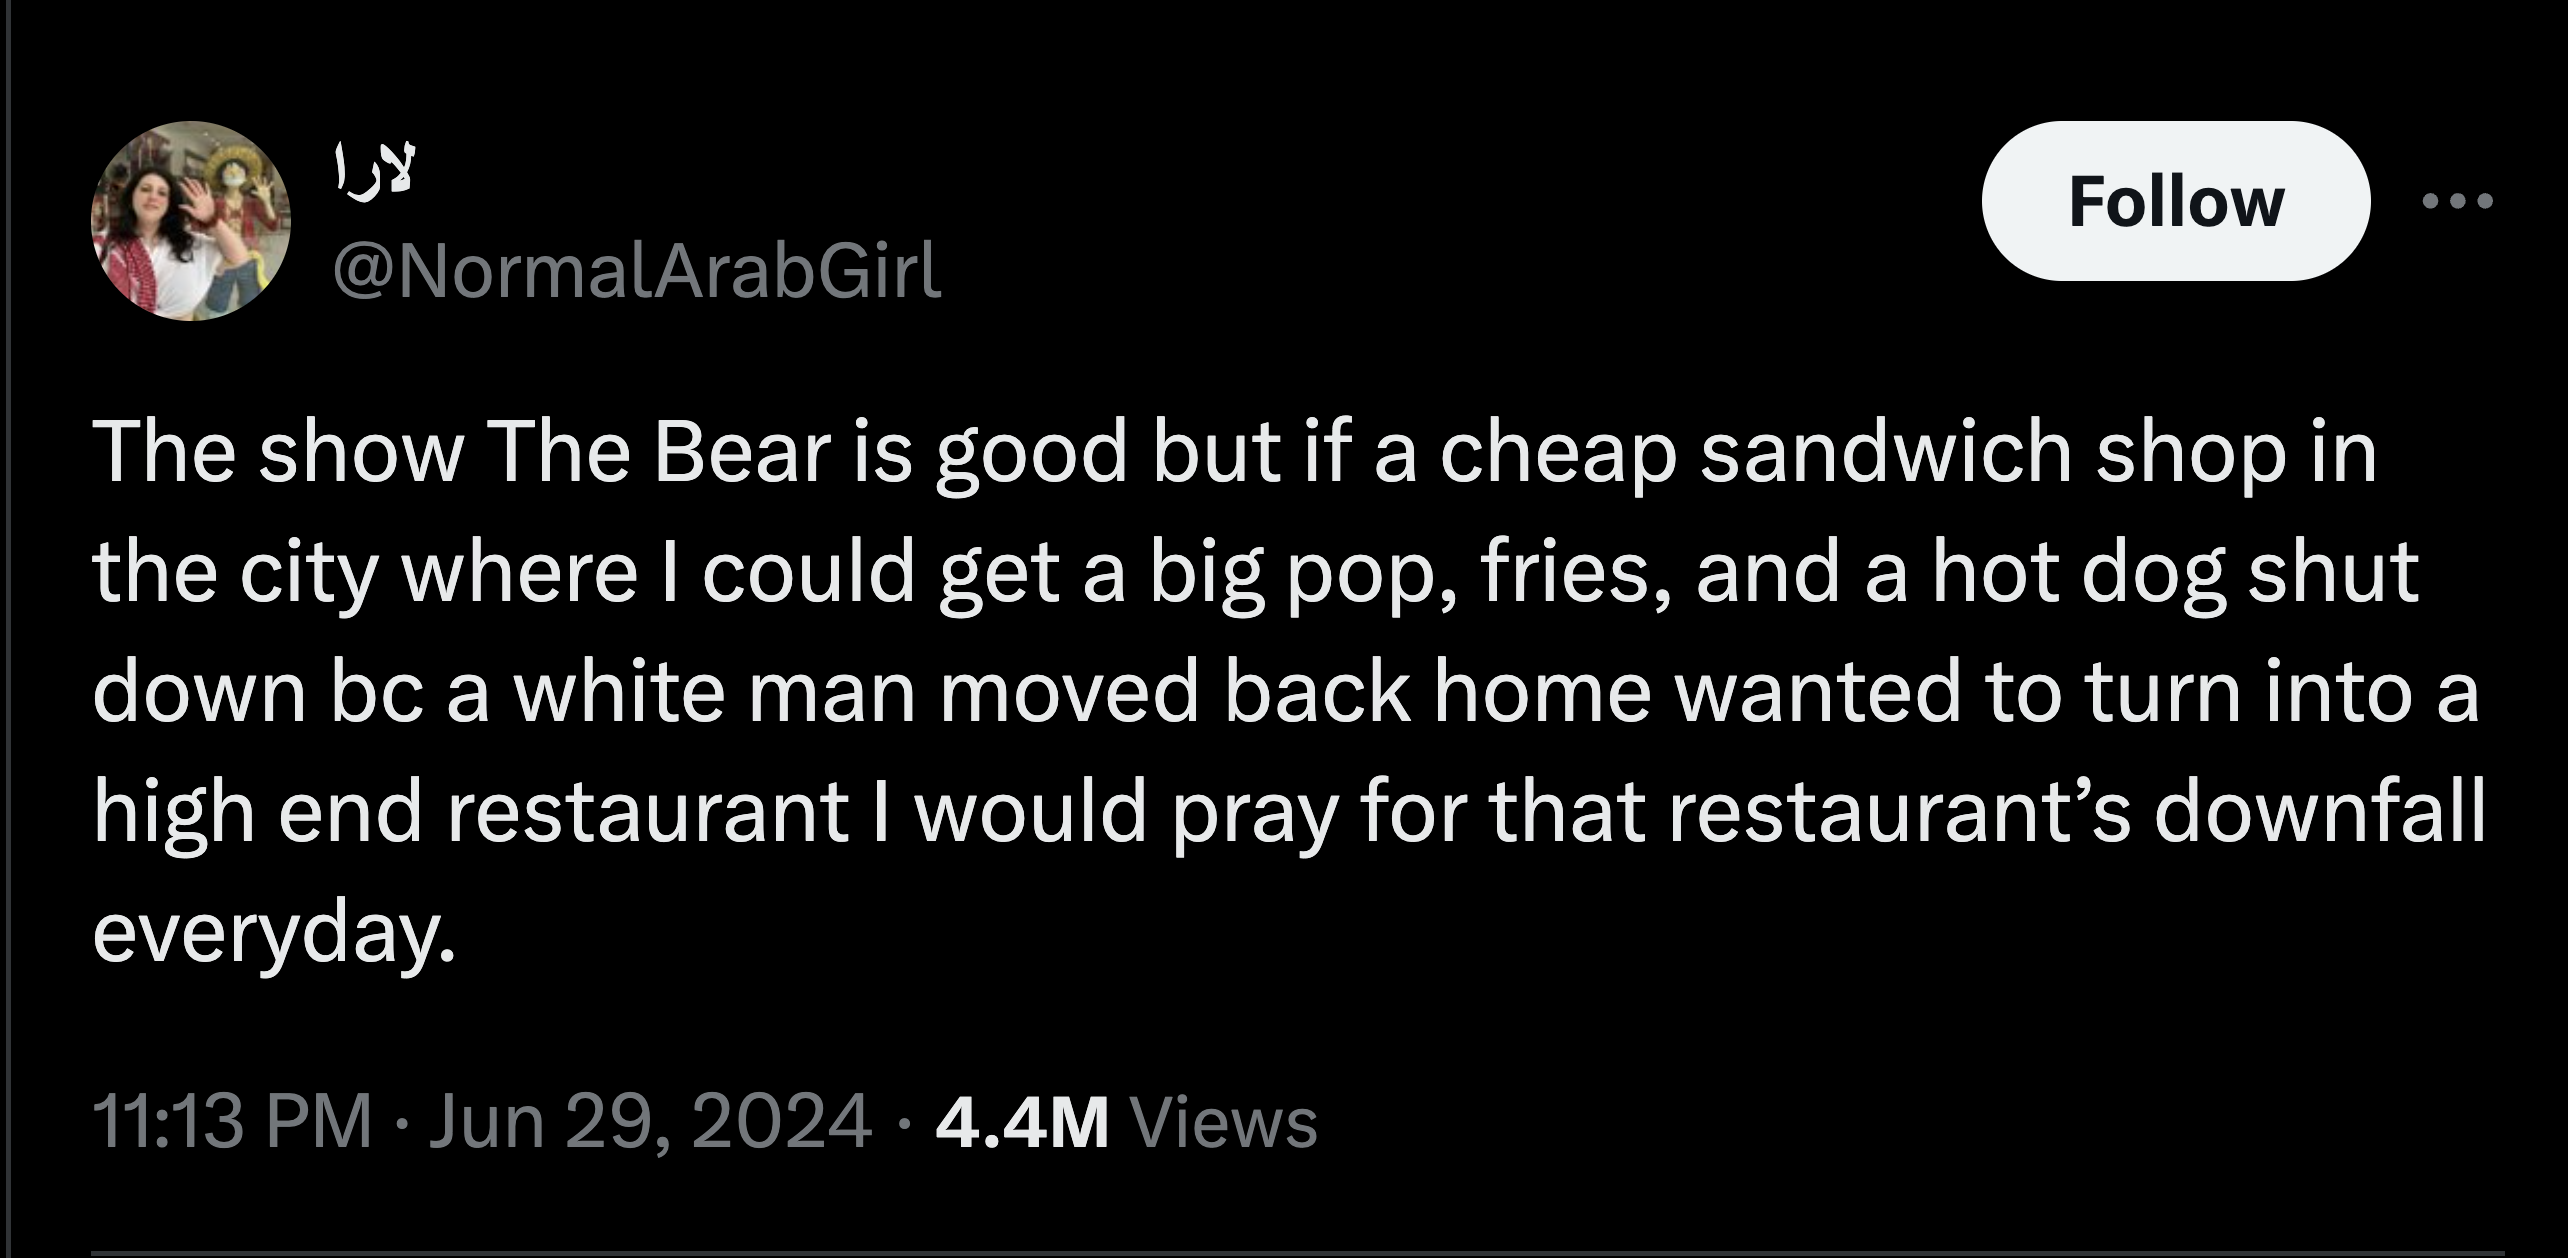 screenshot - The show The Bear is good but if a cheap sandwich shop in the city where I could get a big pop, fries, and a hot dog shut down bc a white man moved back home wanted to turn into a high end restaurant I would pray for that restaurant's downfal